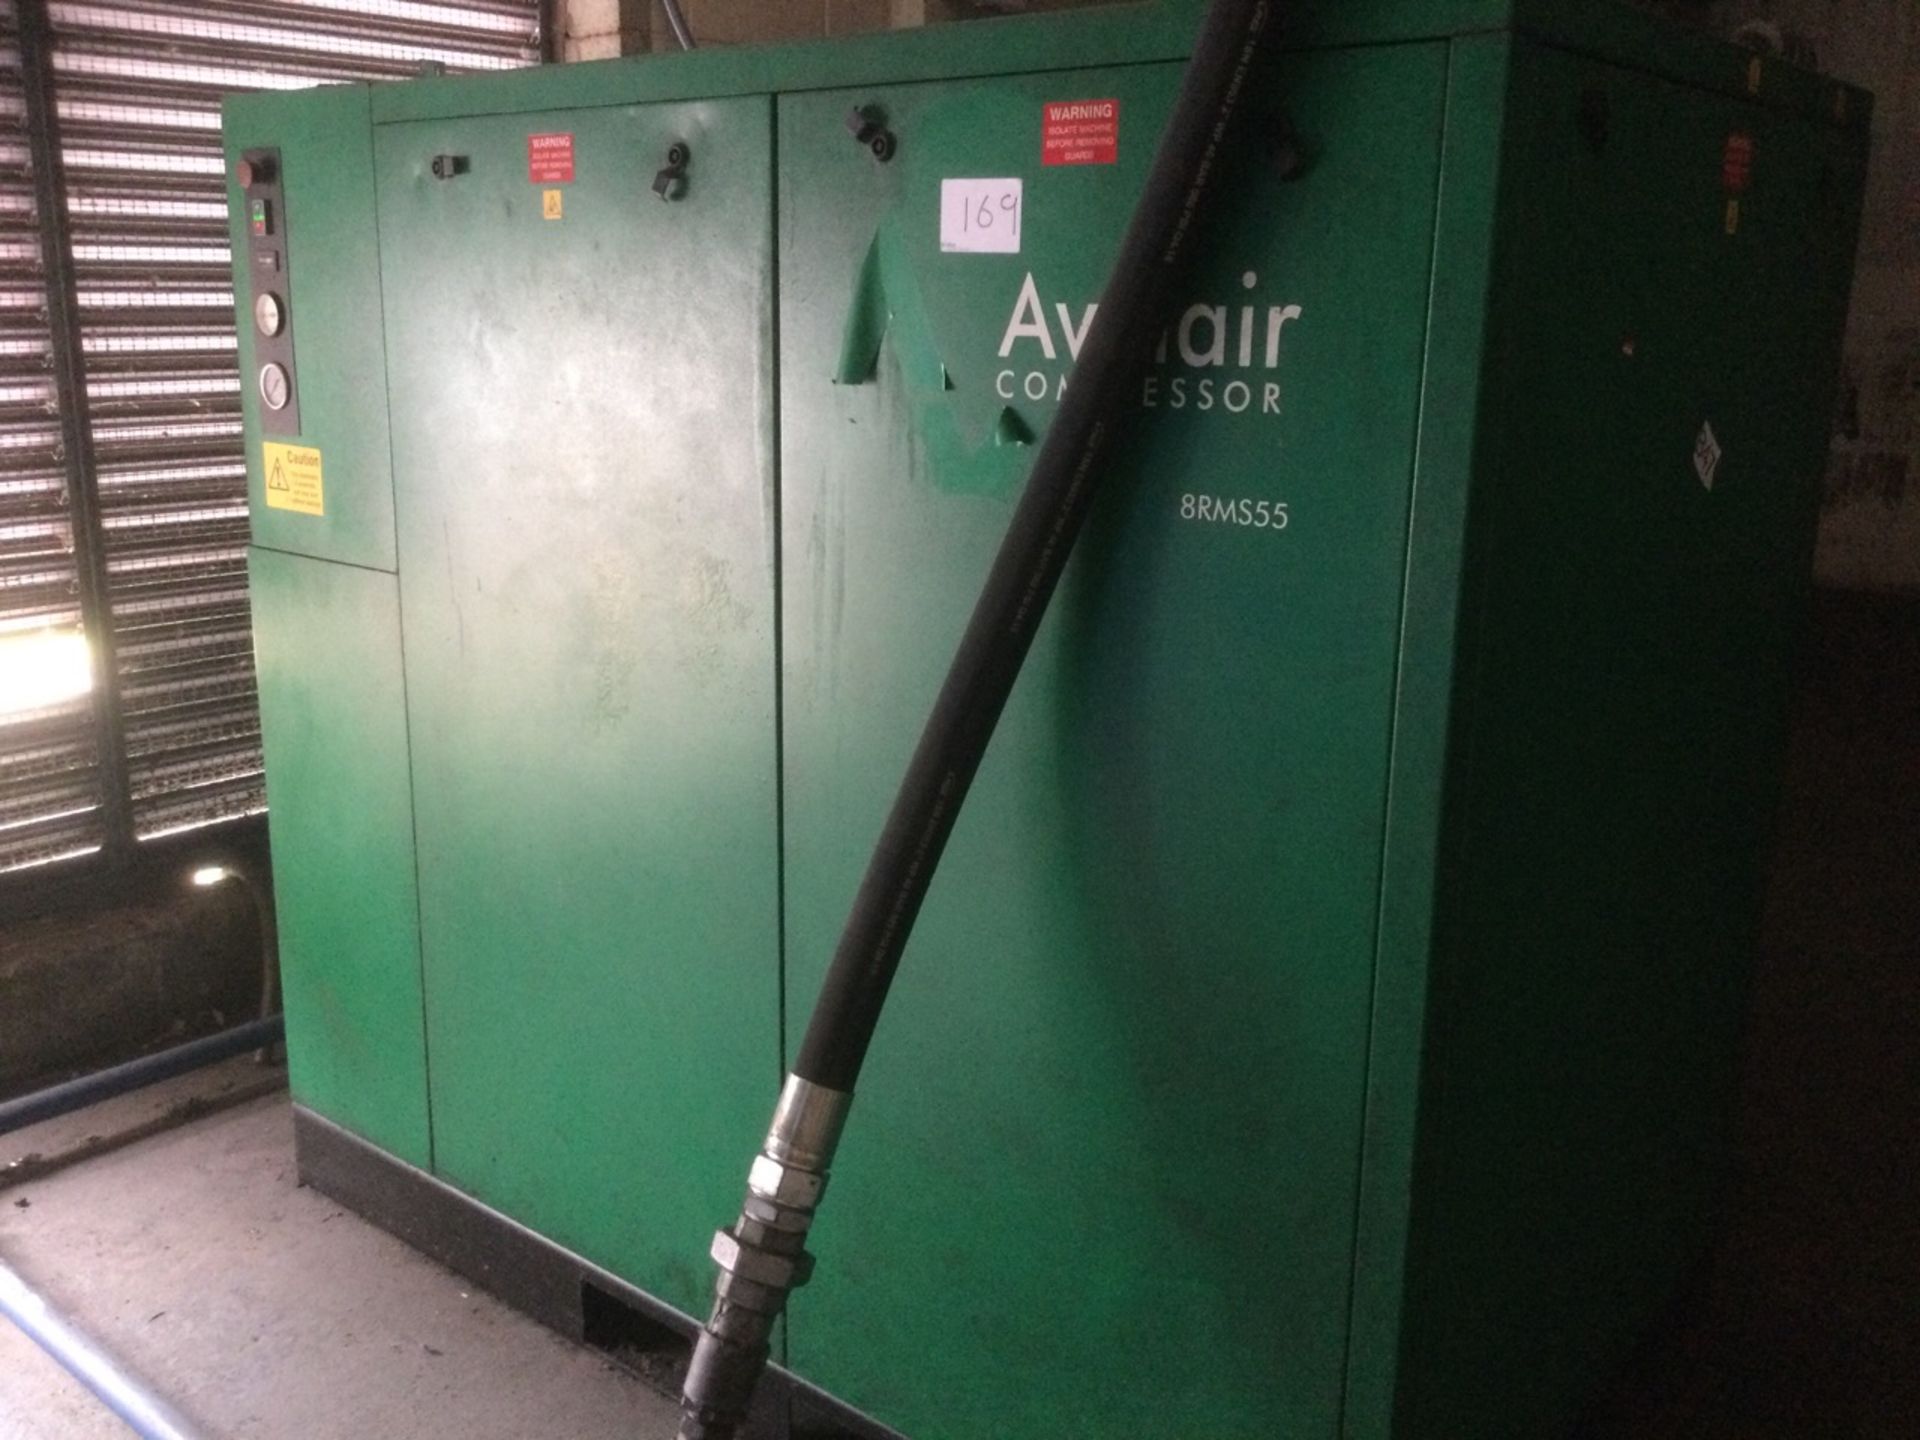 Avelair 8RMS55 Packaged Air Compressor For Spares Or Repair